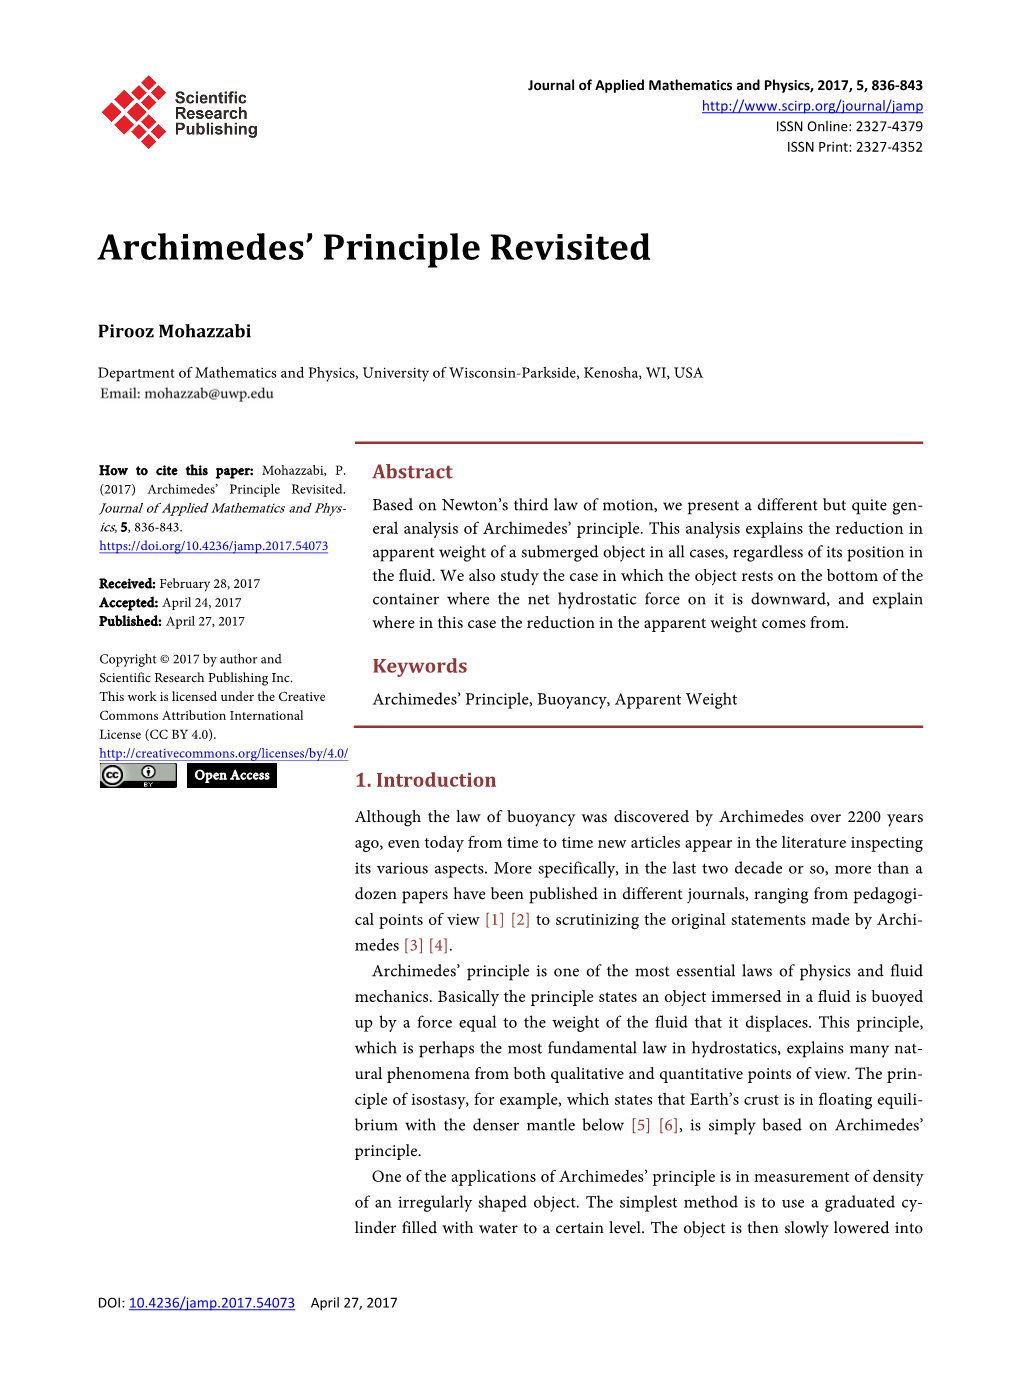 Archimedes' Principle Revisited